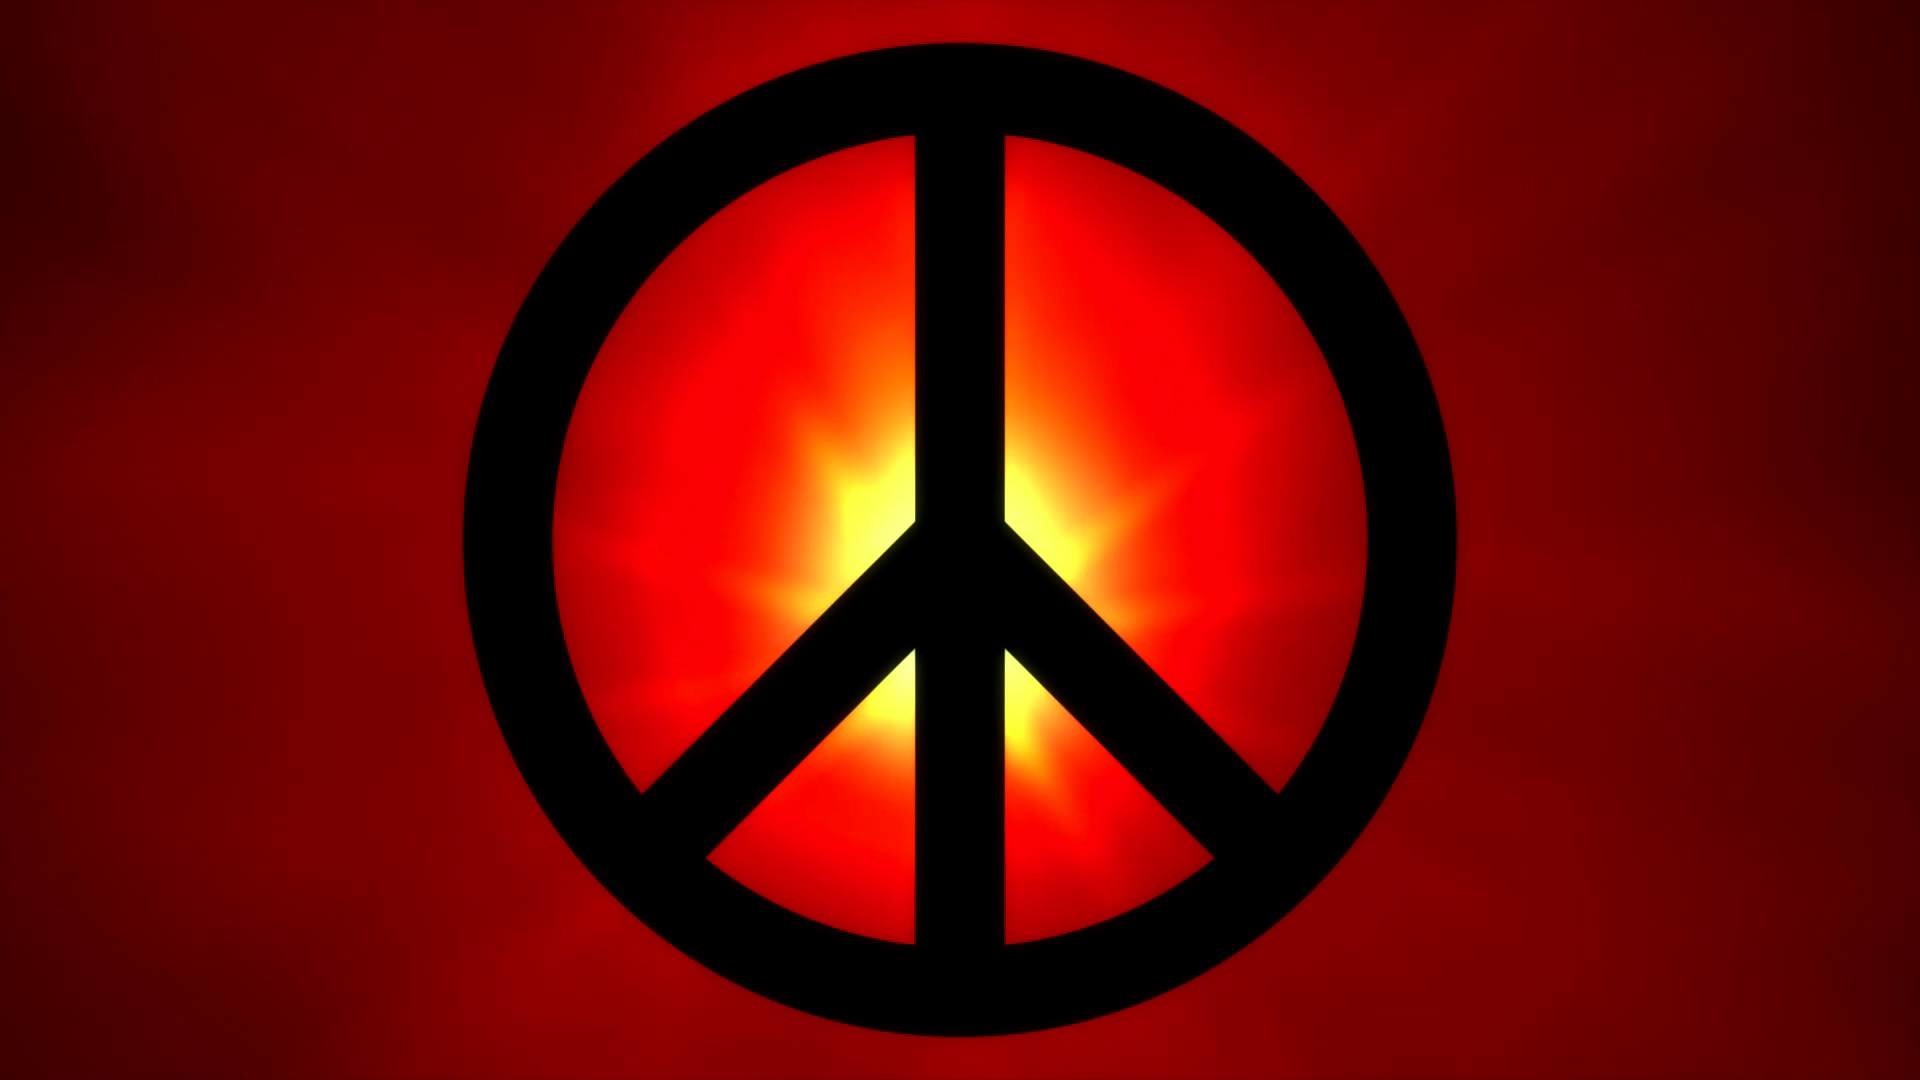 1920x1080 FREE Download HD video backgrounds – abstract black peace sign infront of a  red lens flare - loop - YouTube